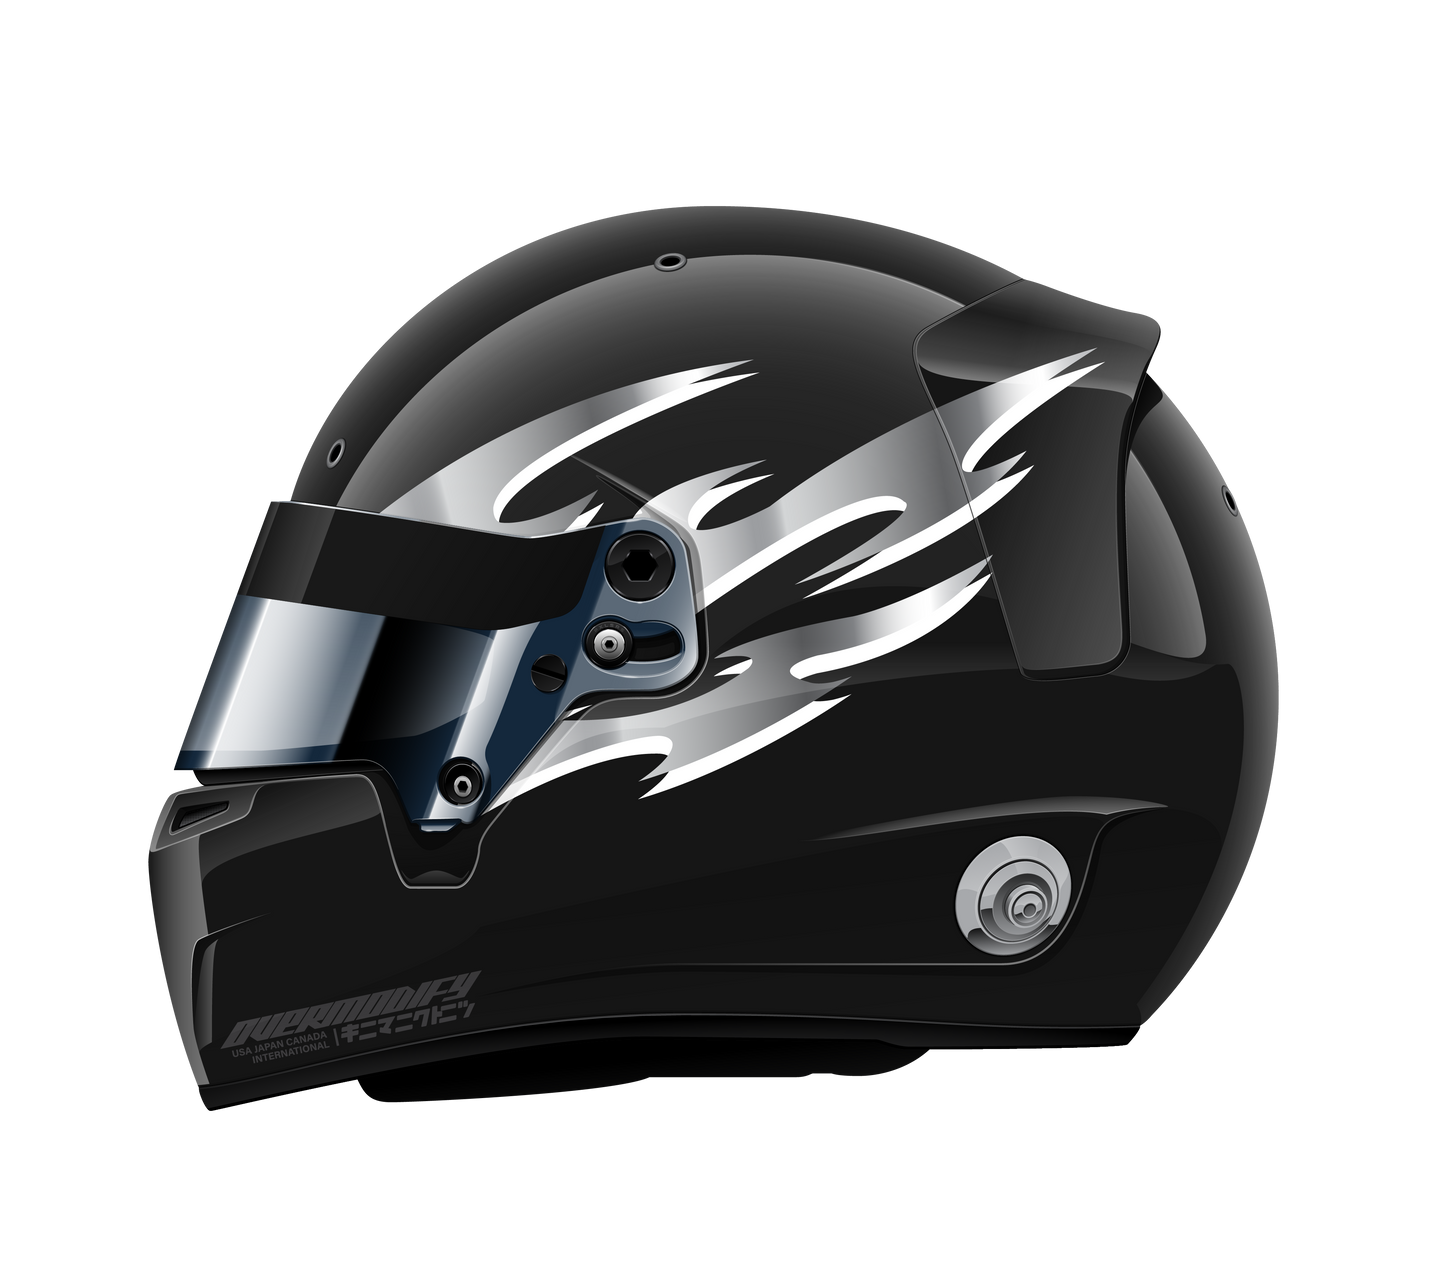 Helmet Graphics for drifting. Motorsports helmet decals and stickers.